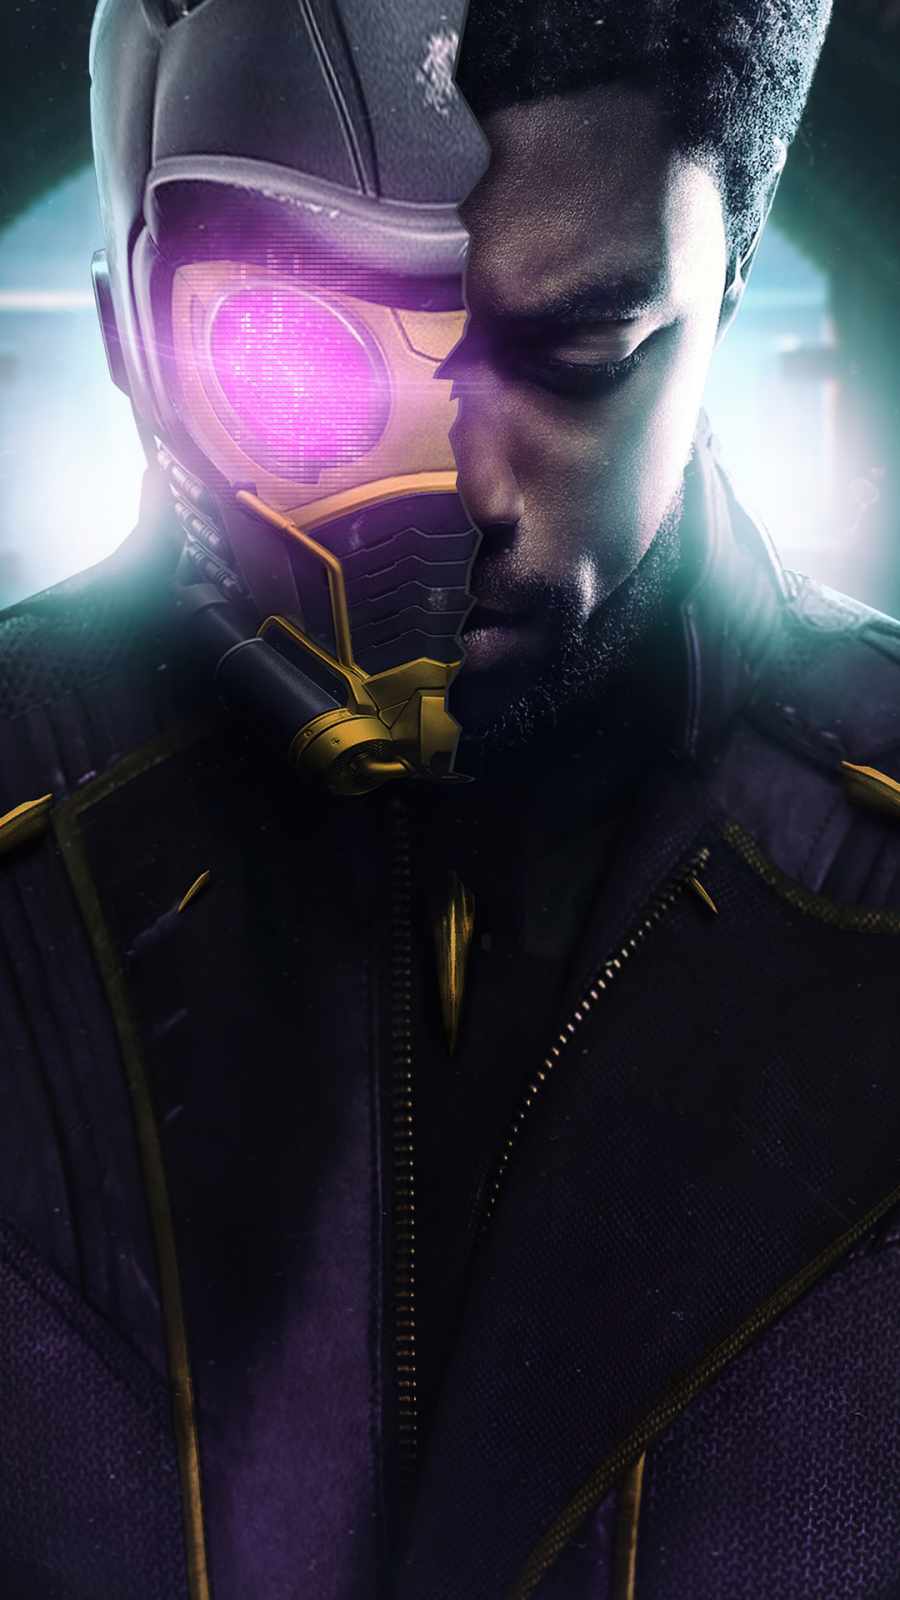 t challa x star lord what if iPhone Wallpaper